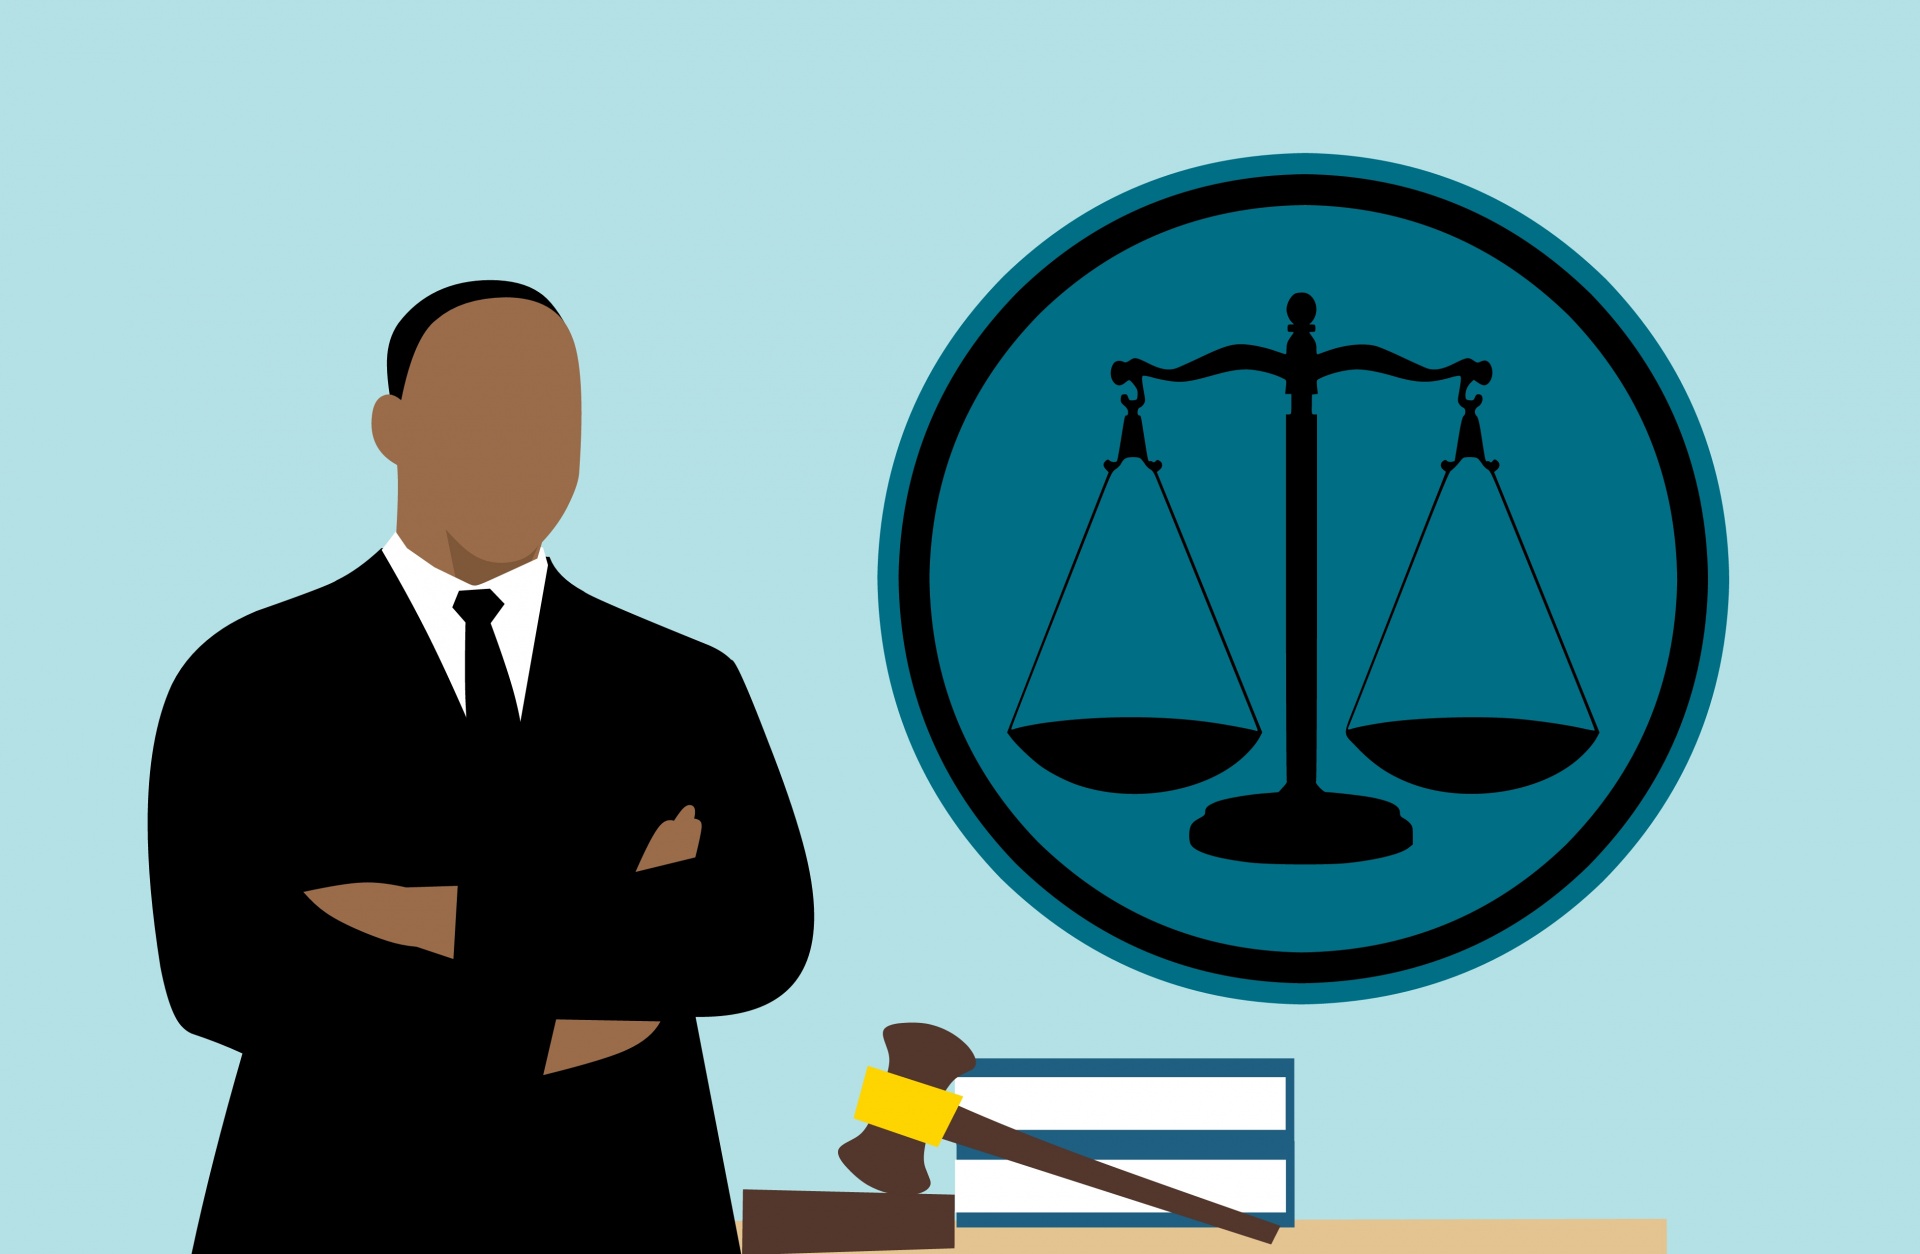 Illustration of a man in a suit with his arms crossed, standing by a desk with a gavel and a stack of books, and a symbol of a scale of justice behind him